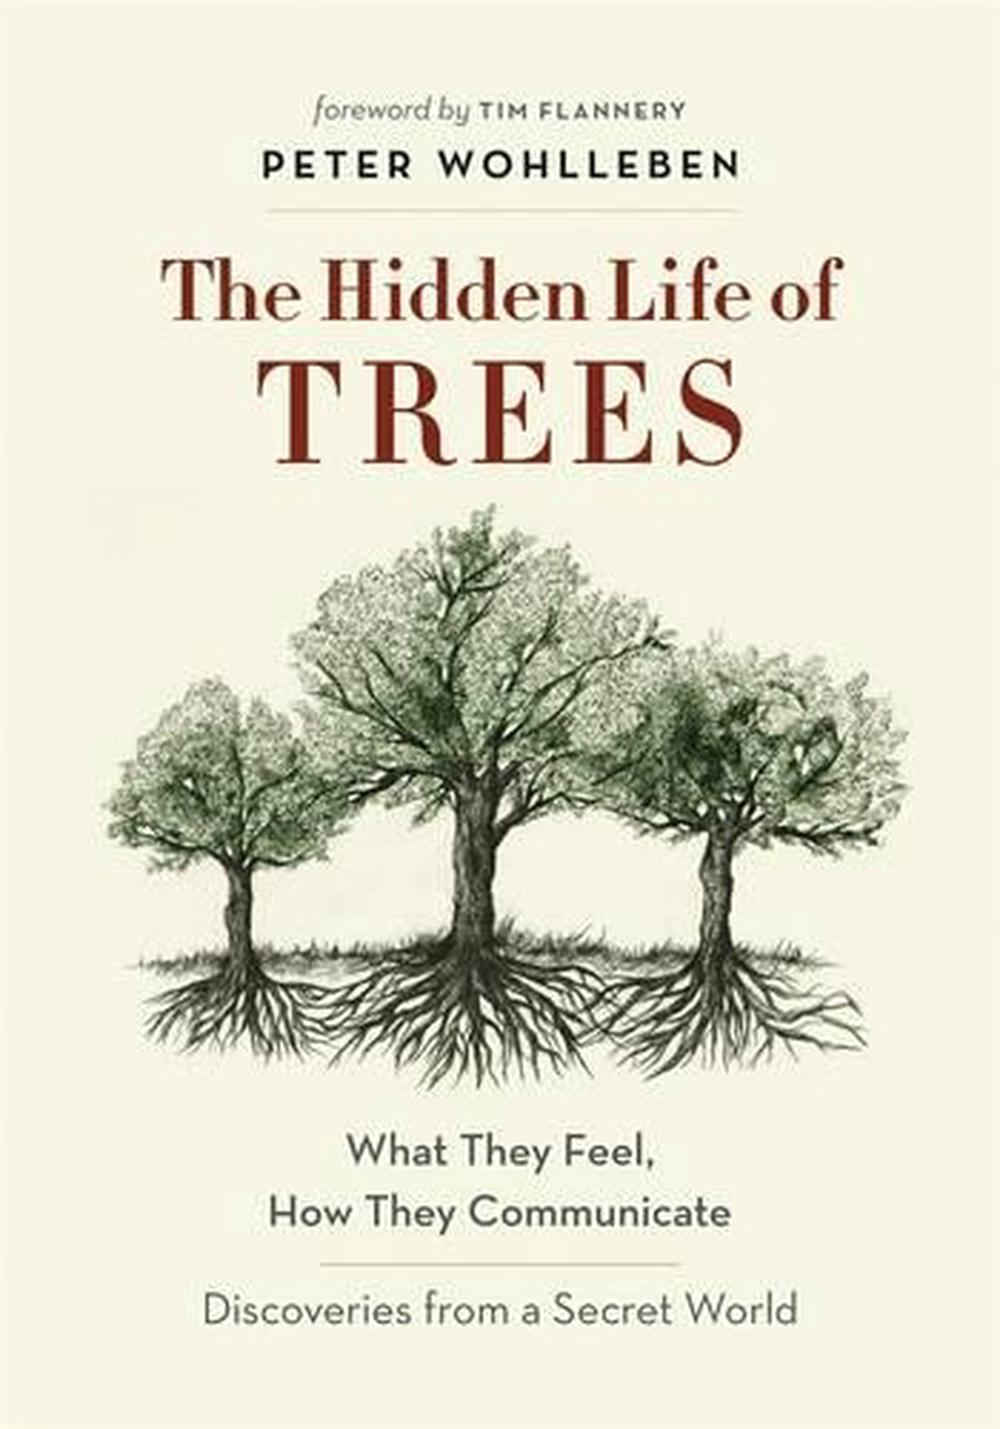 Trees of the World for sale online Book, Other 